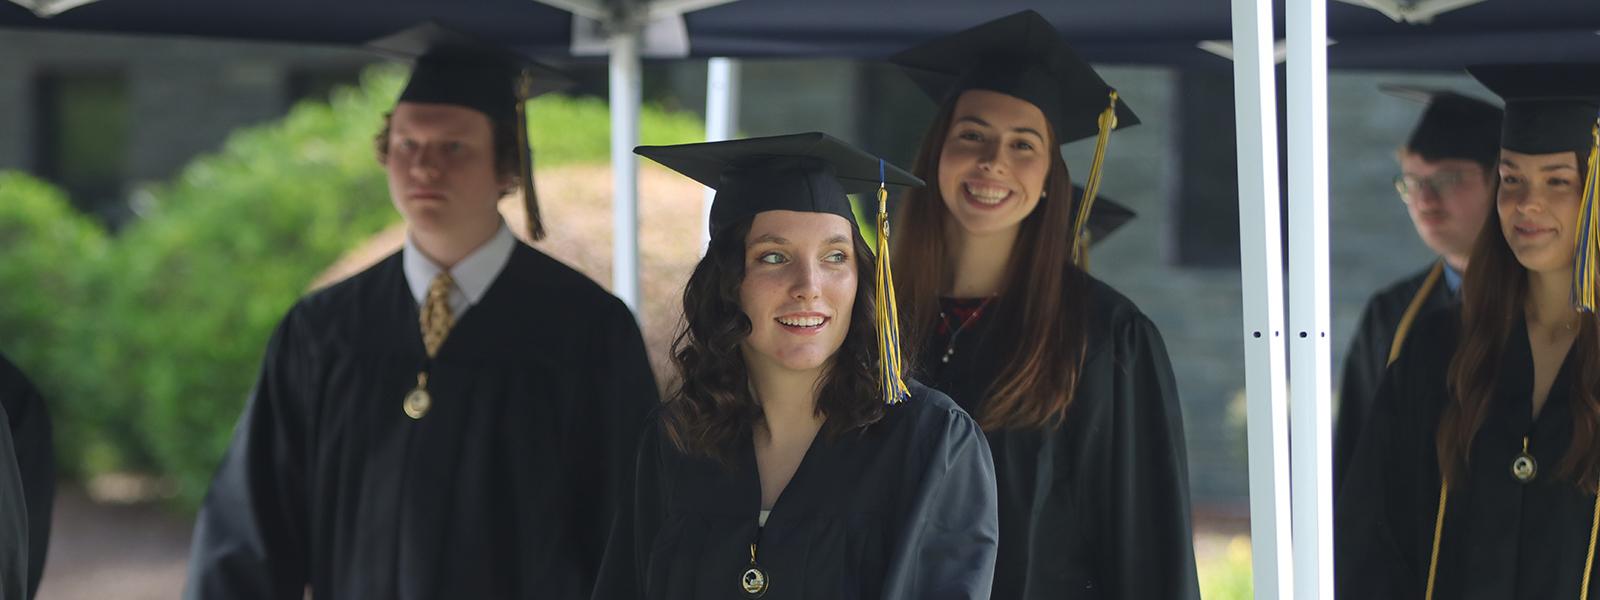 CIU remains a great choice for students in the latest U.S. News & World Report survey.